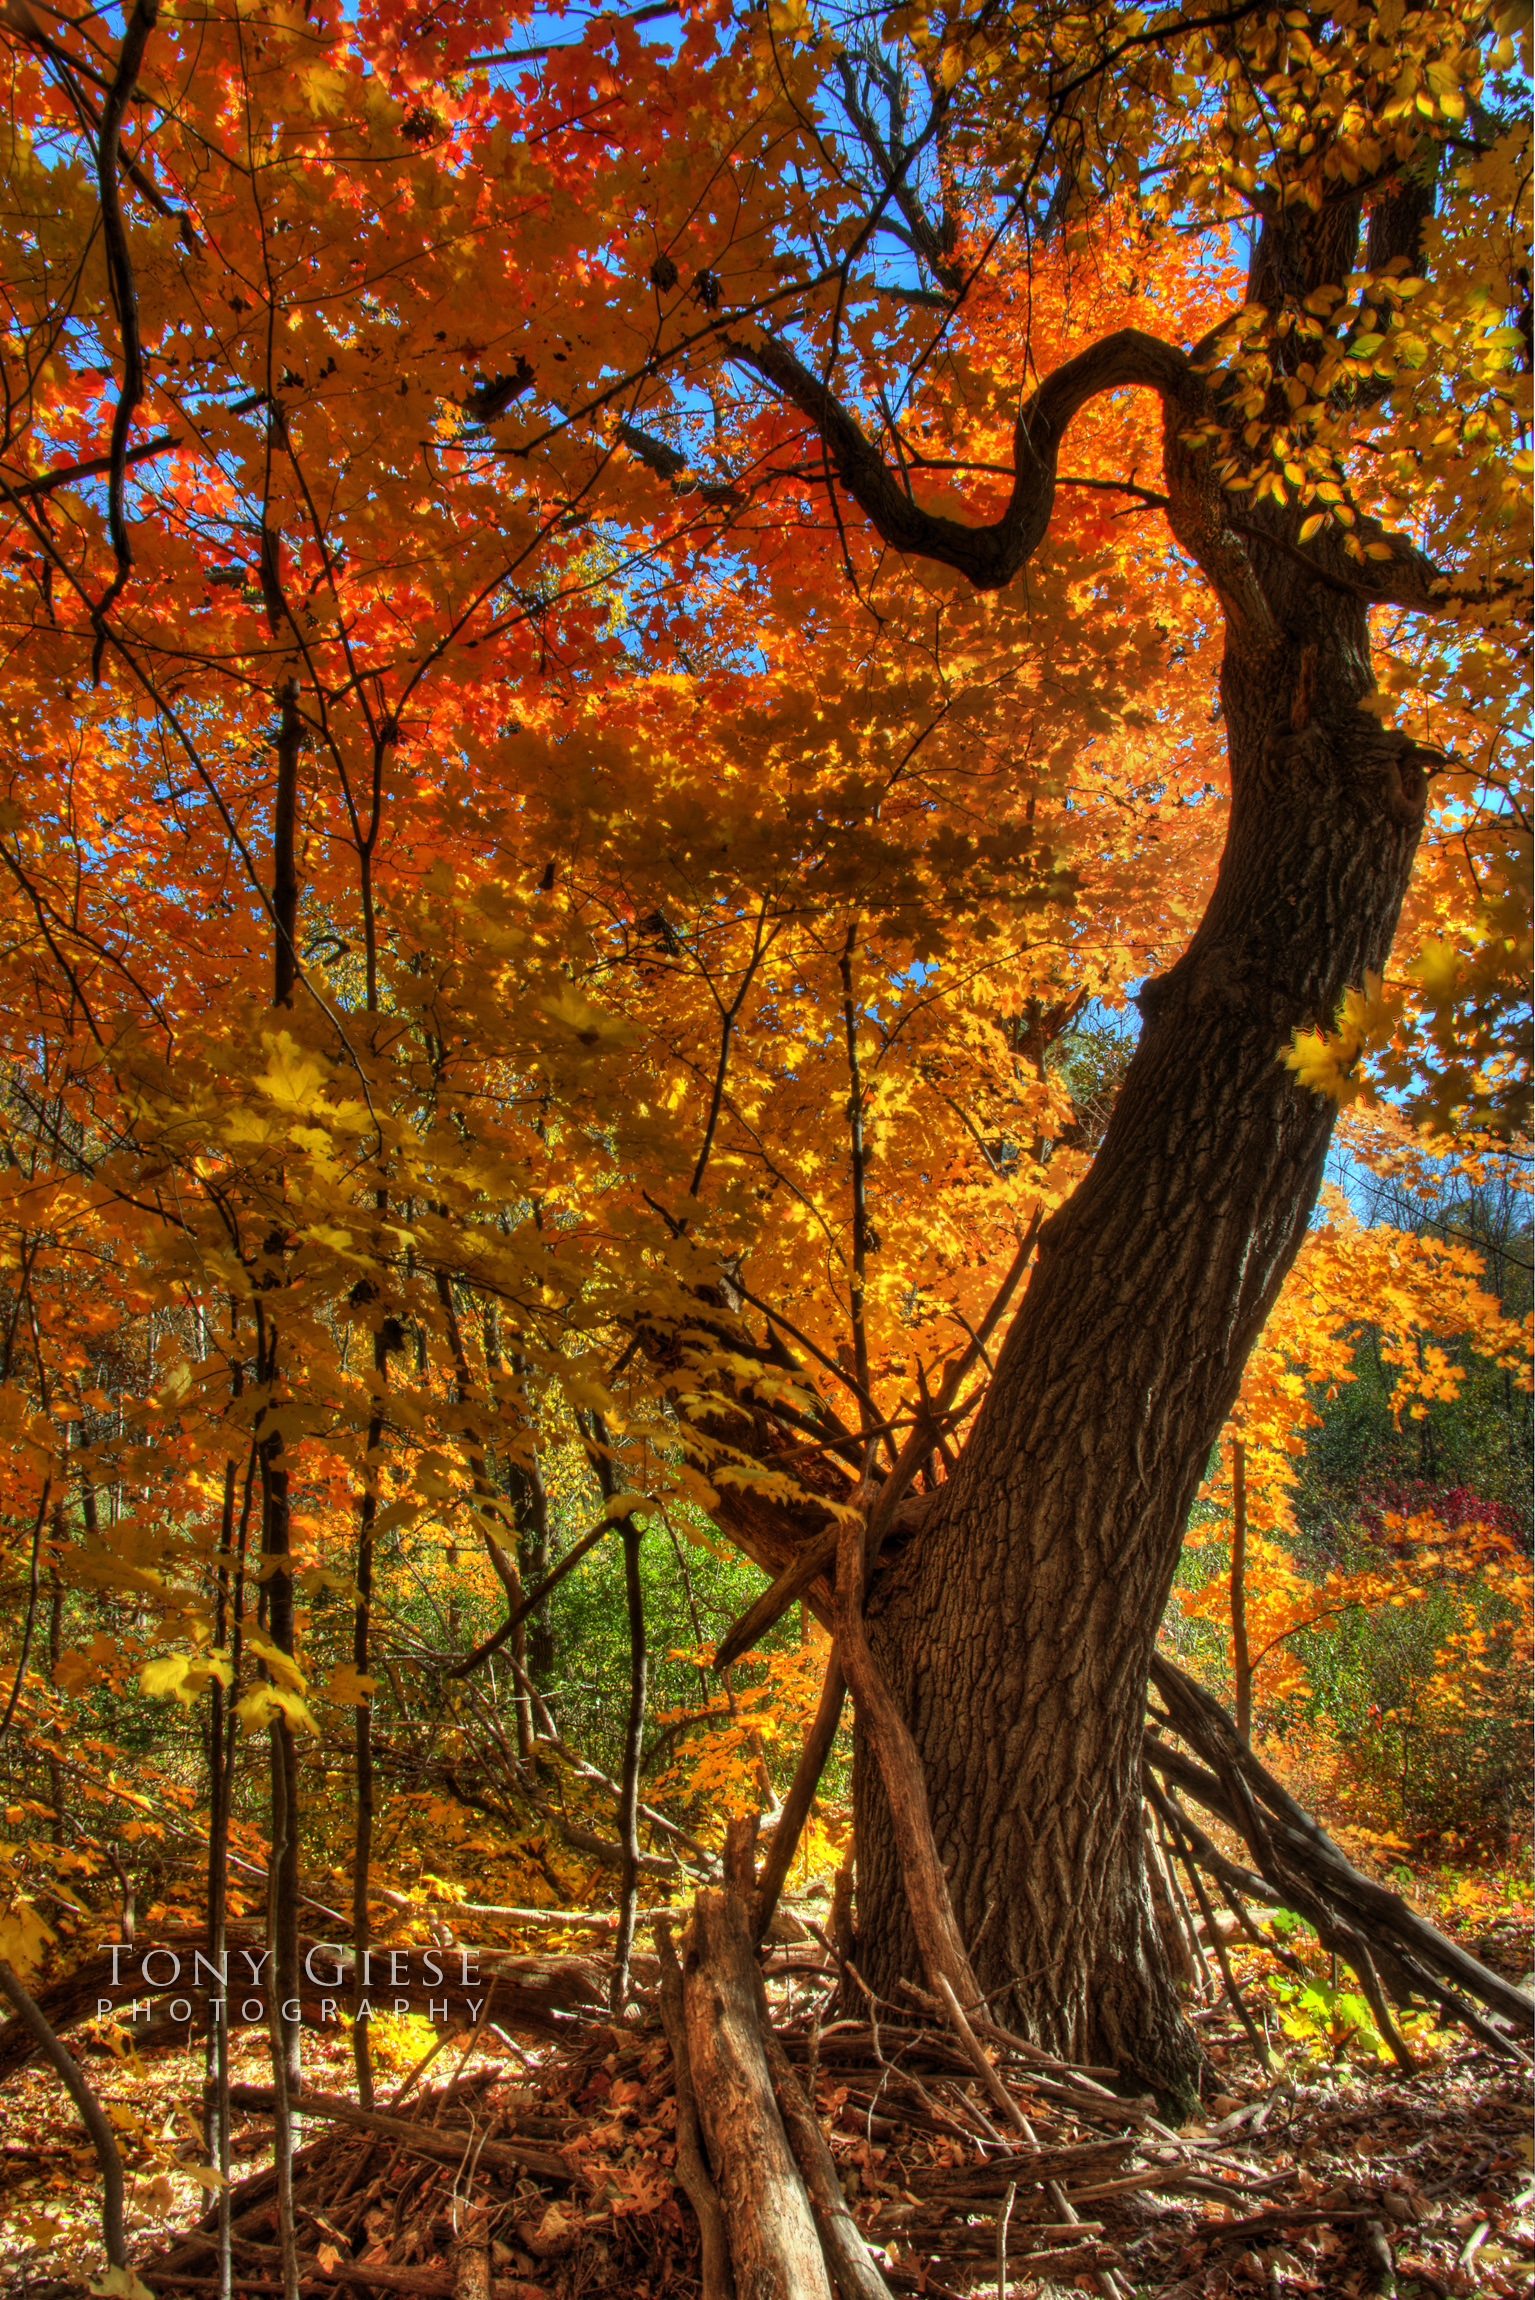 Old tree with it's fallen branches and gorgeous fall colors, Elm Creek Park Reserve, Maple Grove, Minnesota. Photo by Tony Giese Photography.